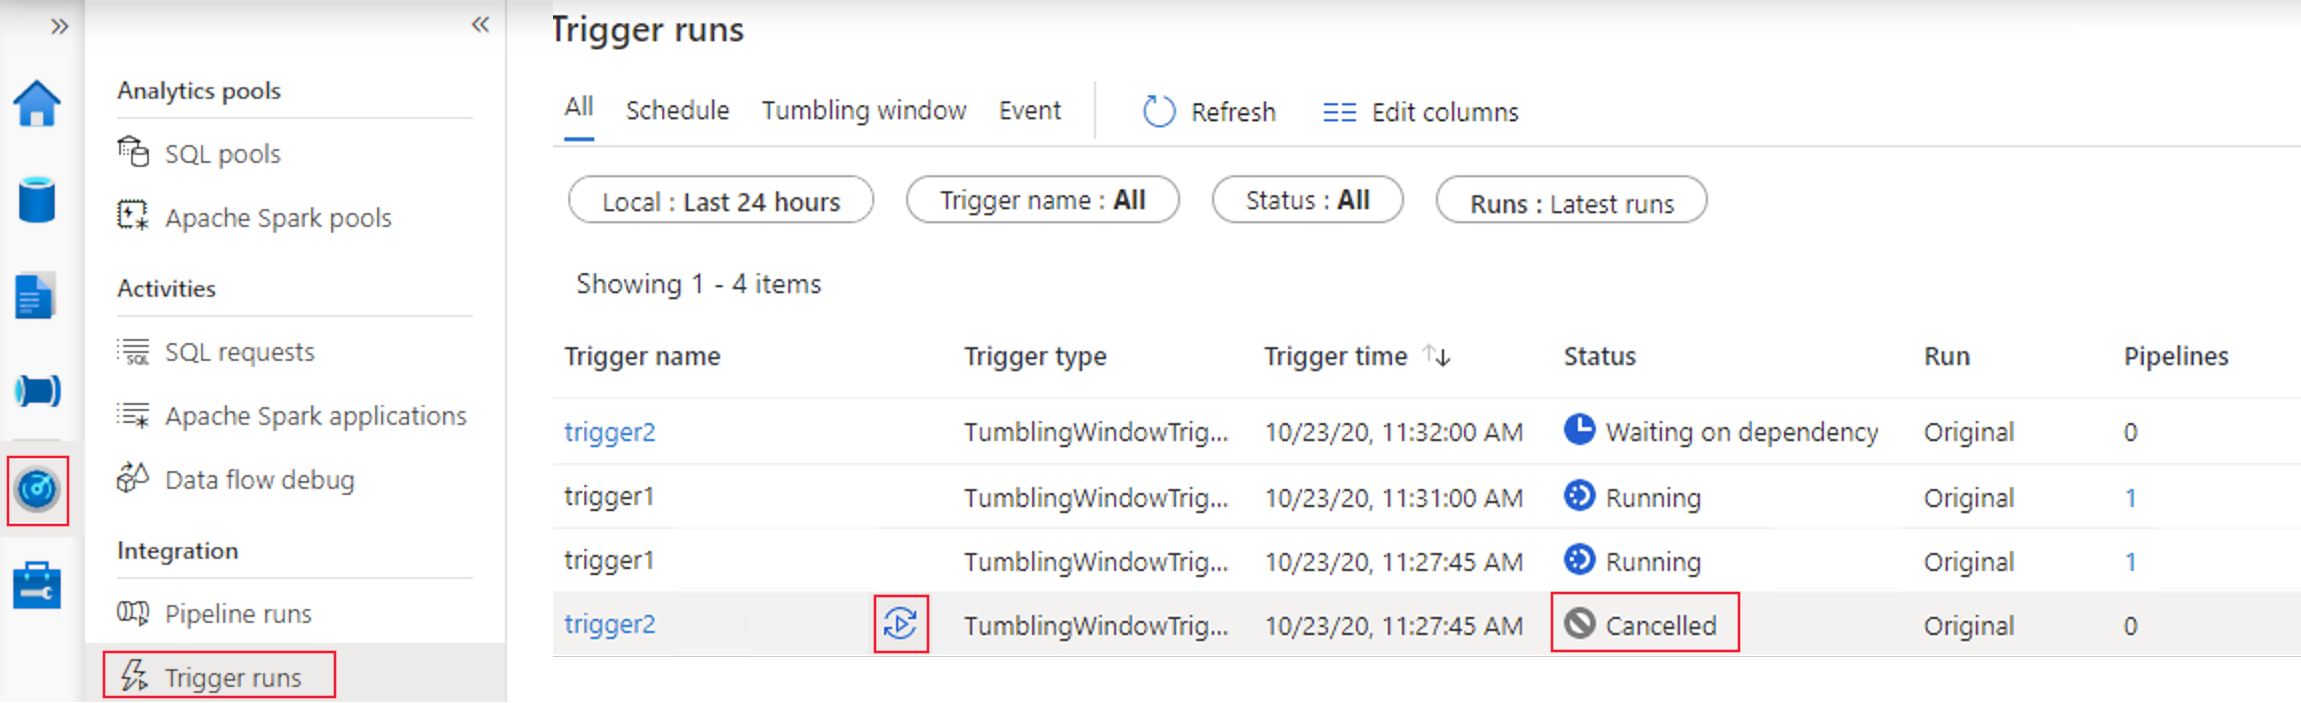 Rerun a tumbling window trigger for previously canceled runs